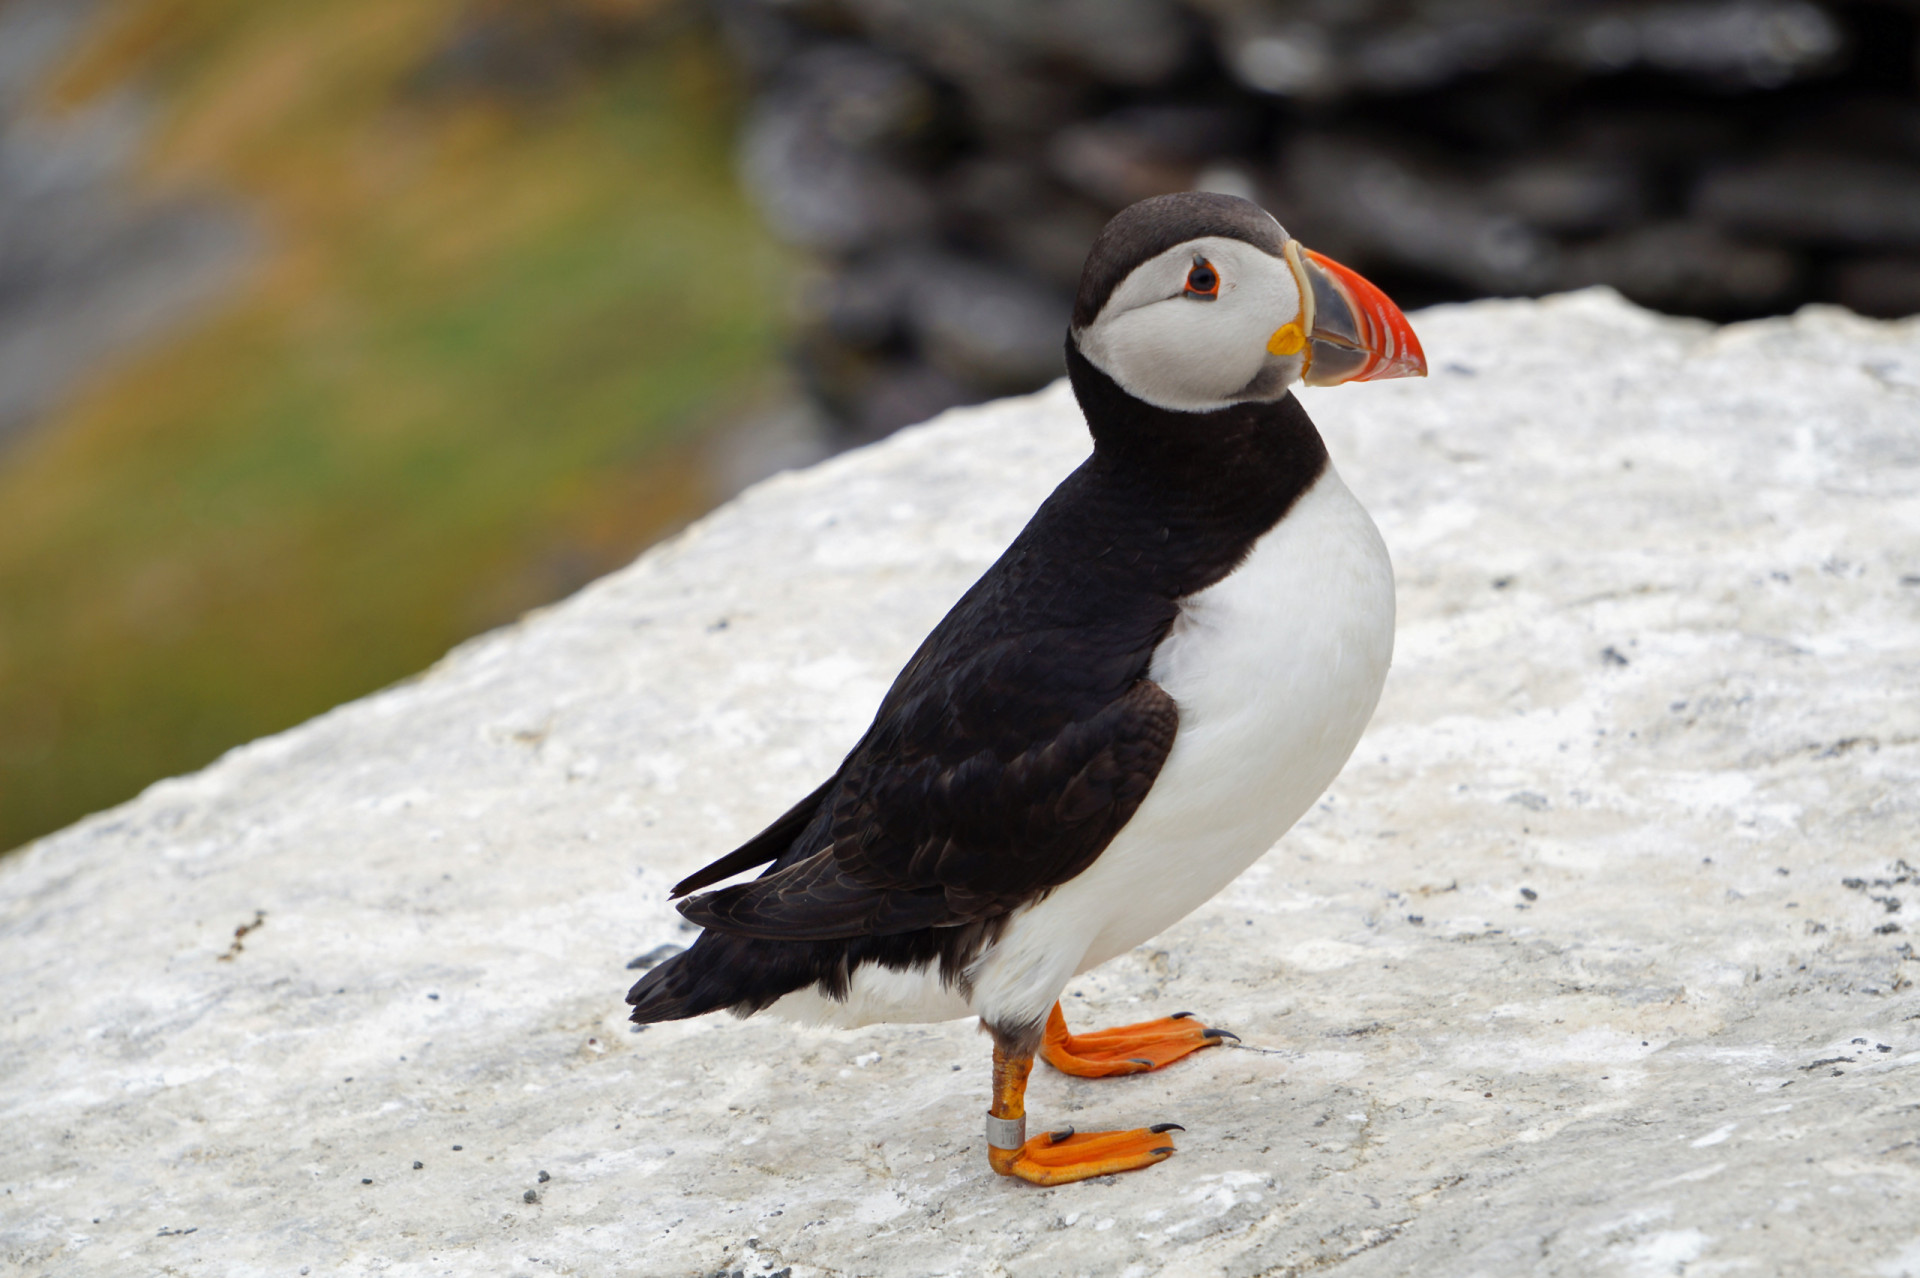 <p>Puffins nest on Skellig Michael, which is home to a breeding colony from May to August. Each year thousands of puffins descend here, to raise their young.</p>